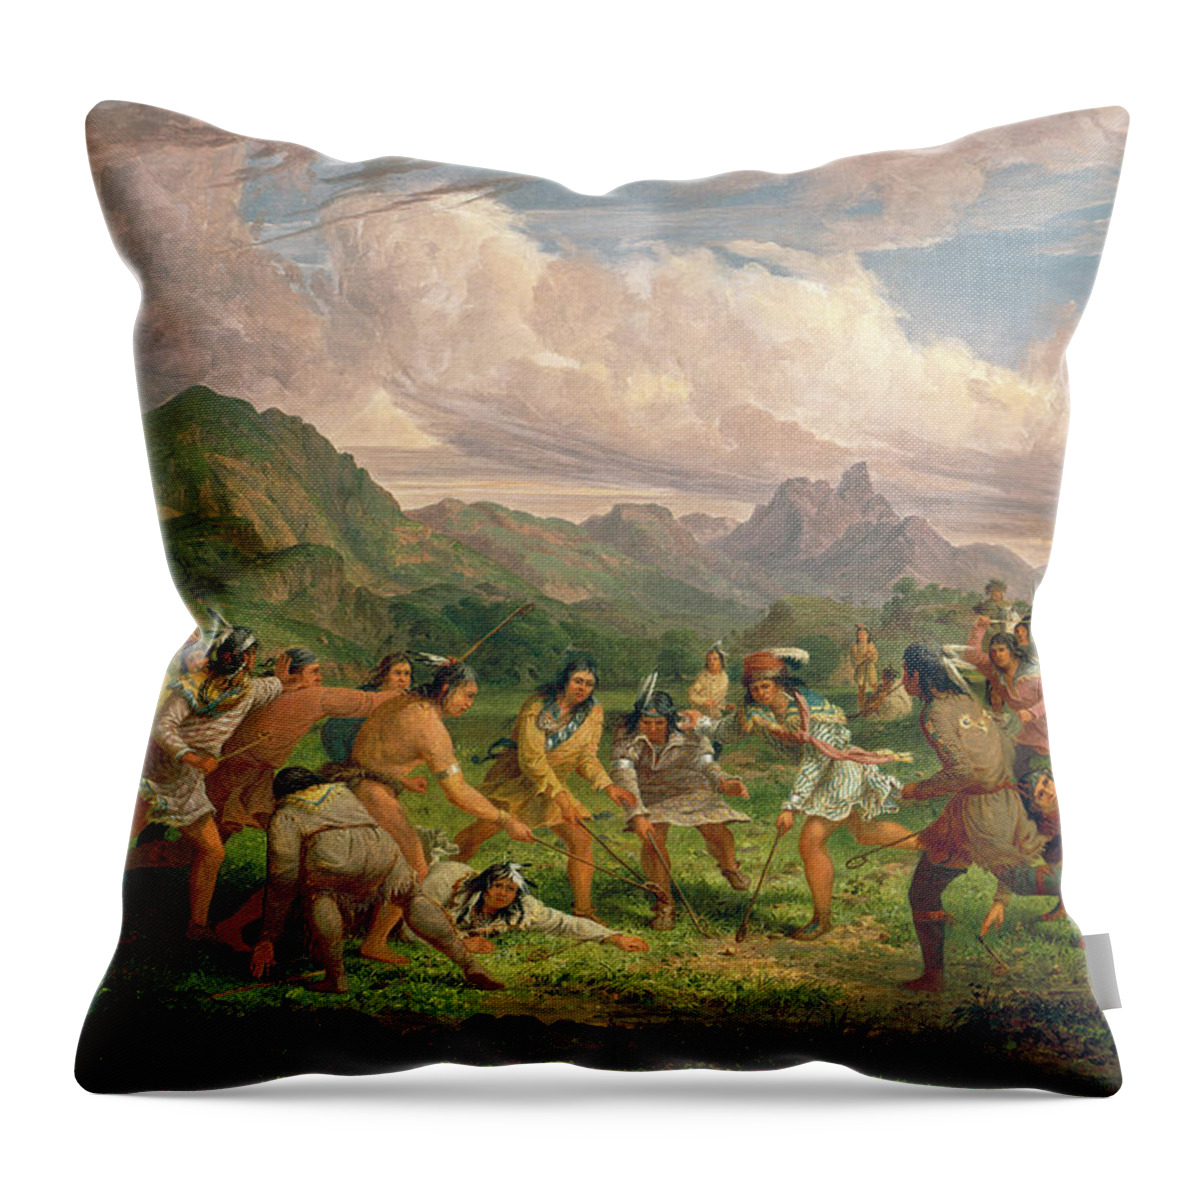 1851 Throw Pillow featuring the painting Sioux Lacrosse Playing by Granger